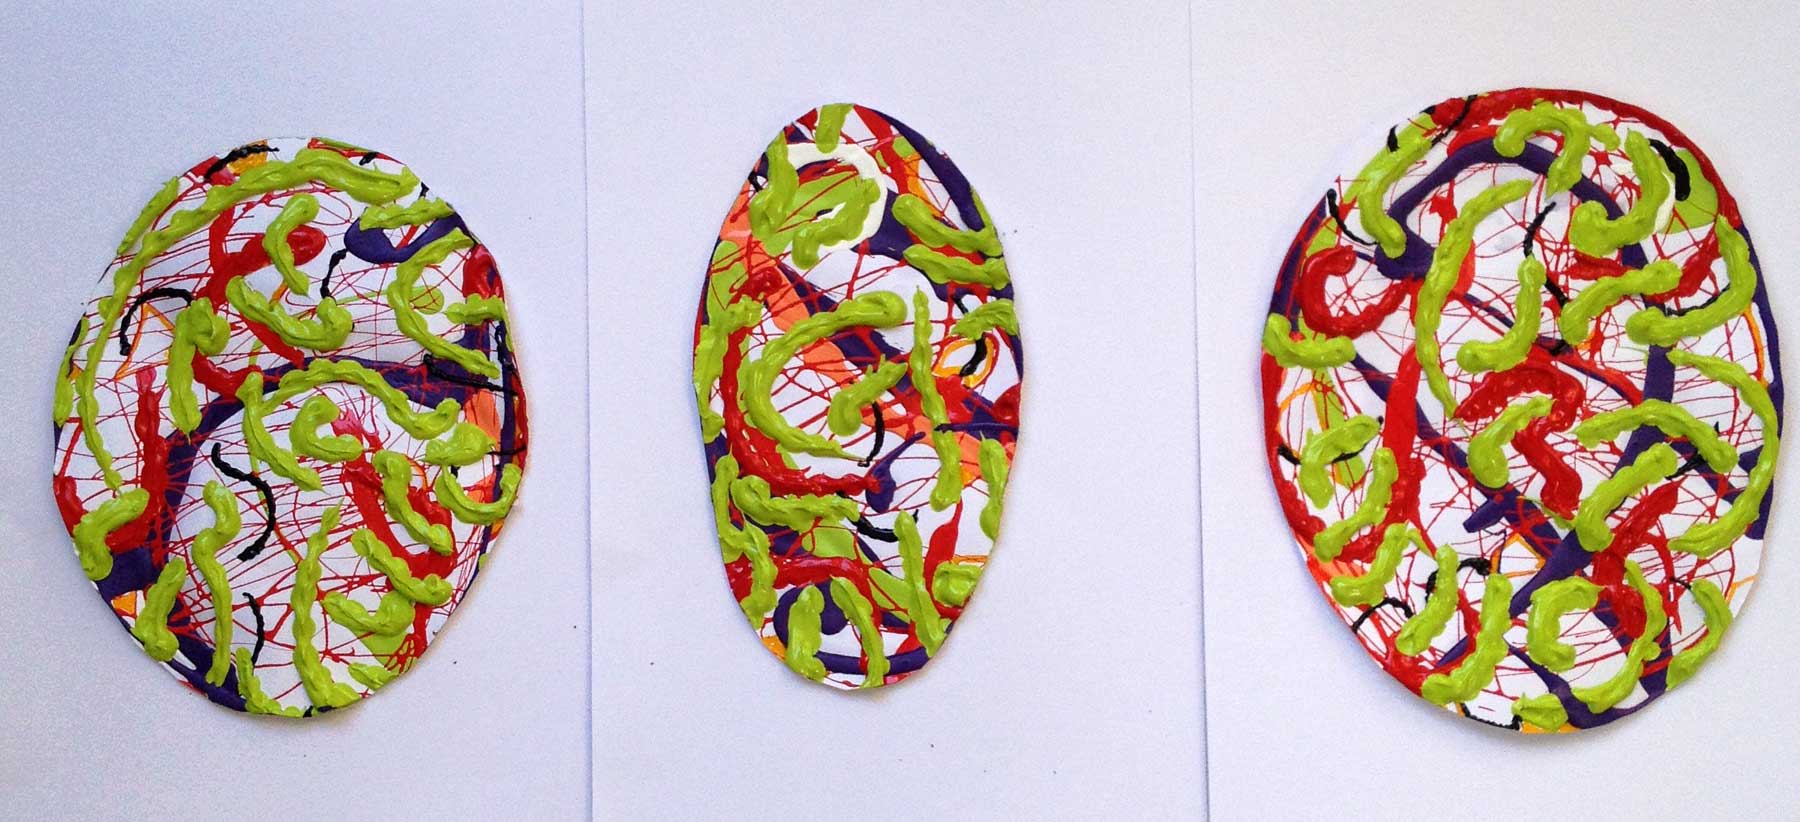 Eggs 3, triptych, painting by Nicola Guerraz, acrylic on paper, 21 x 30 cm each, 2014